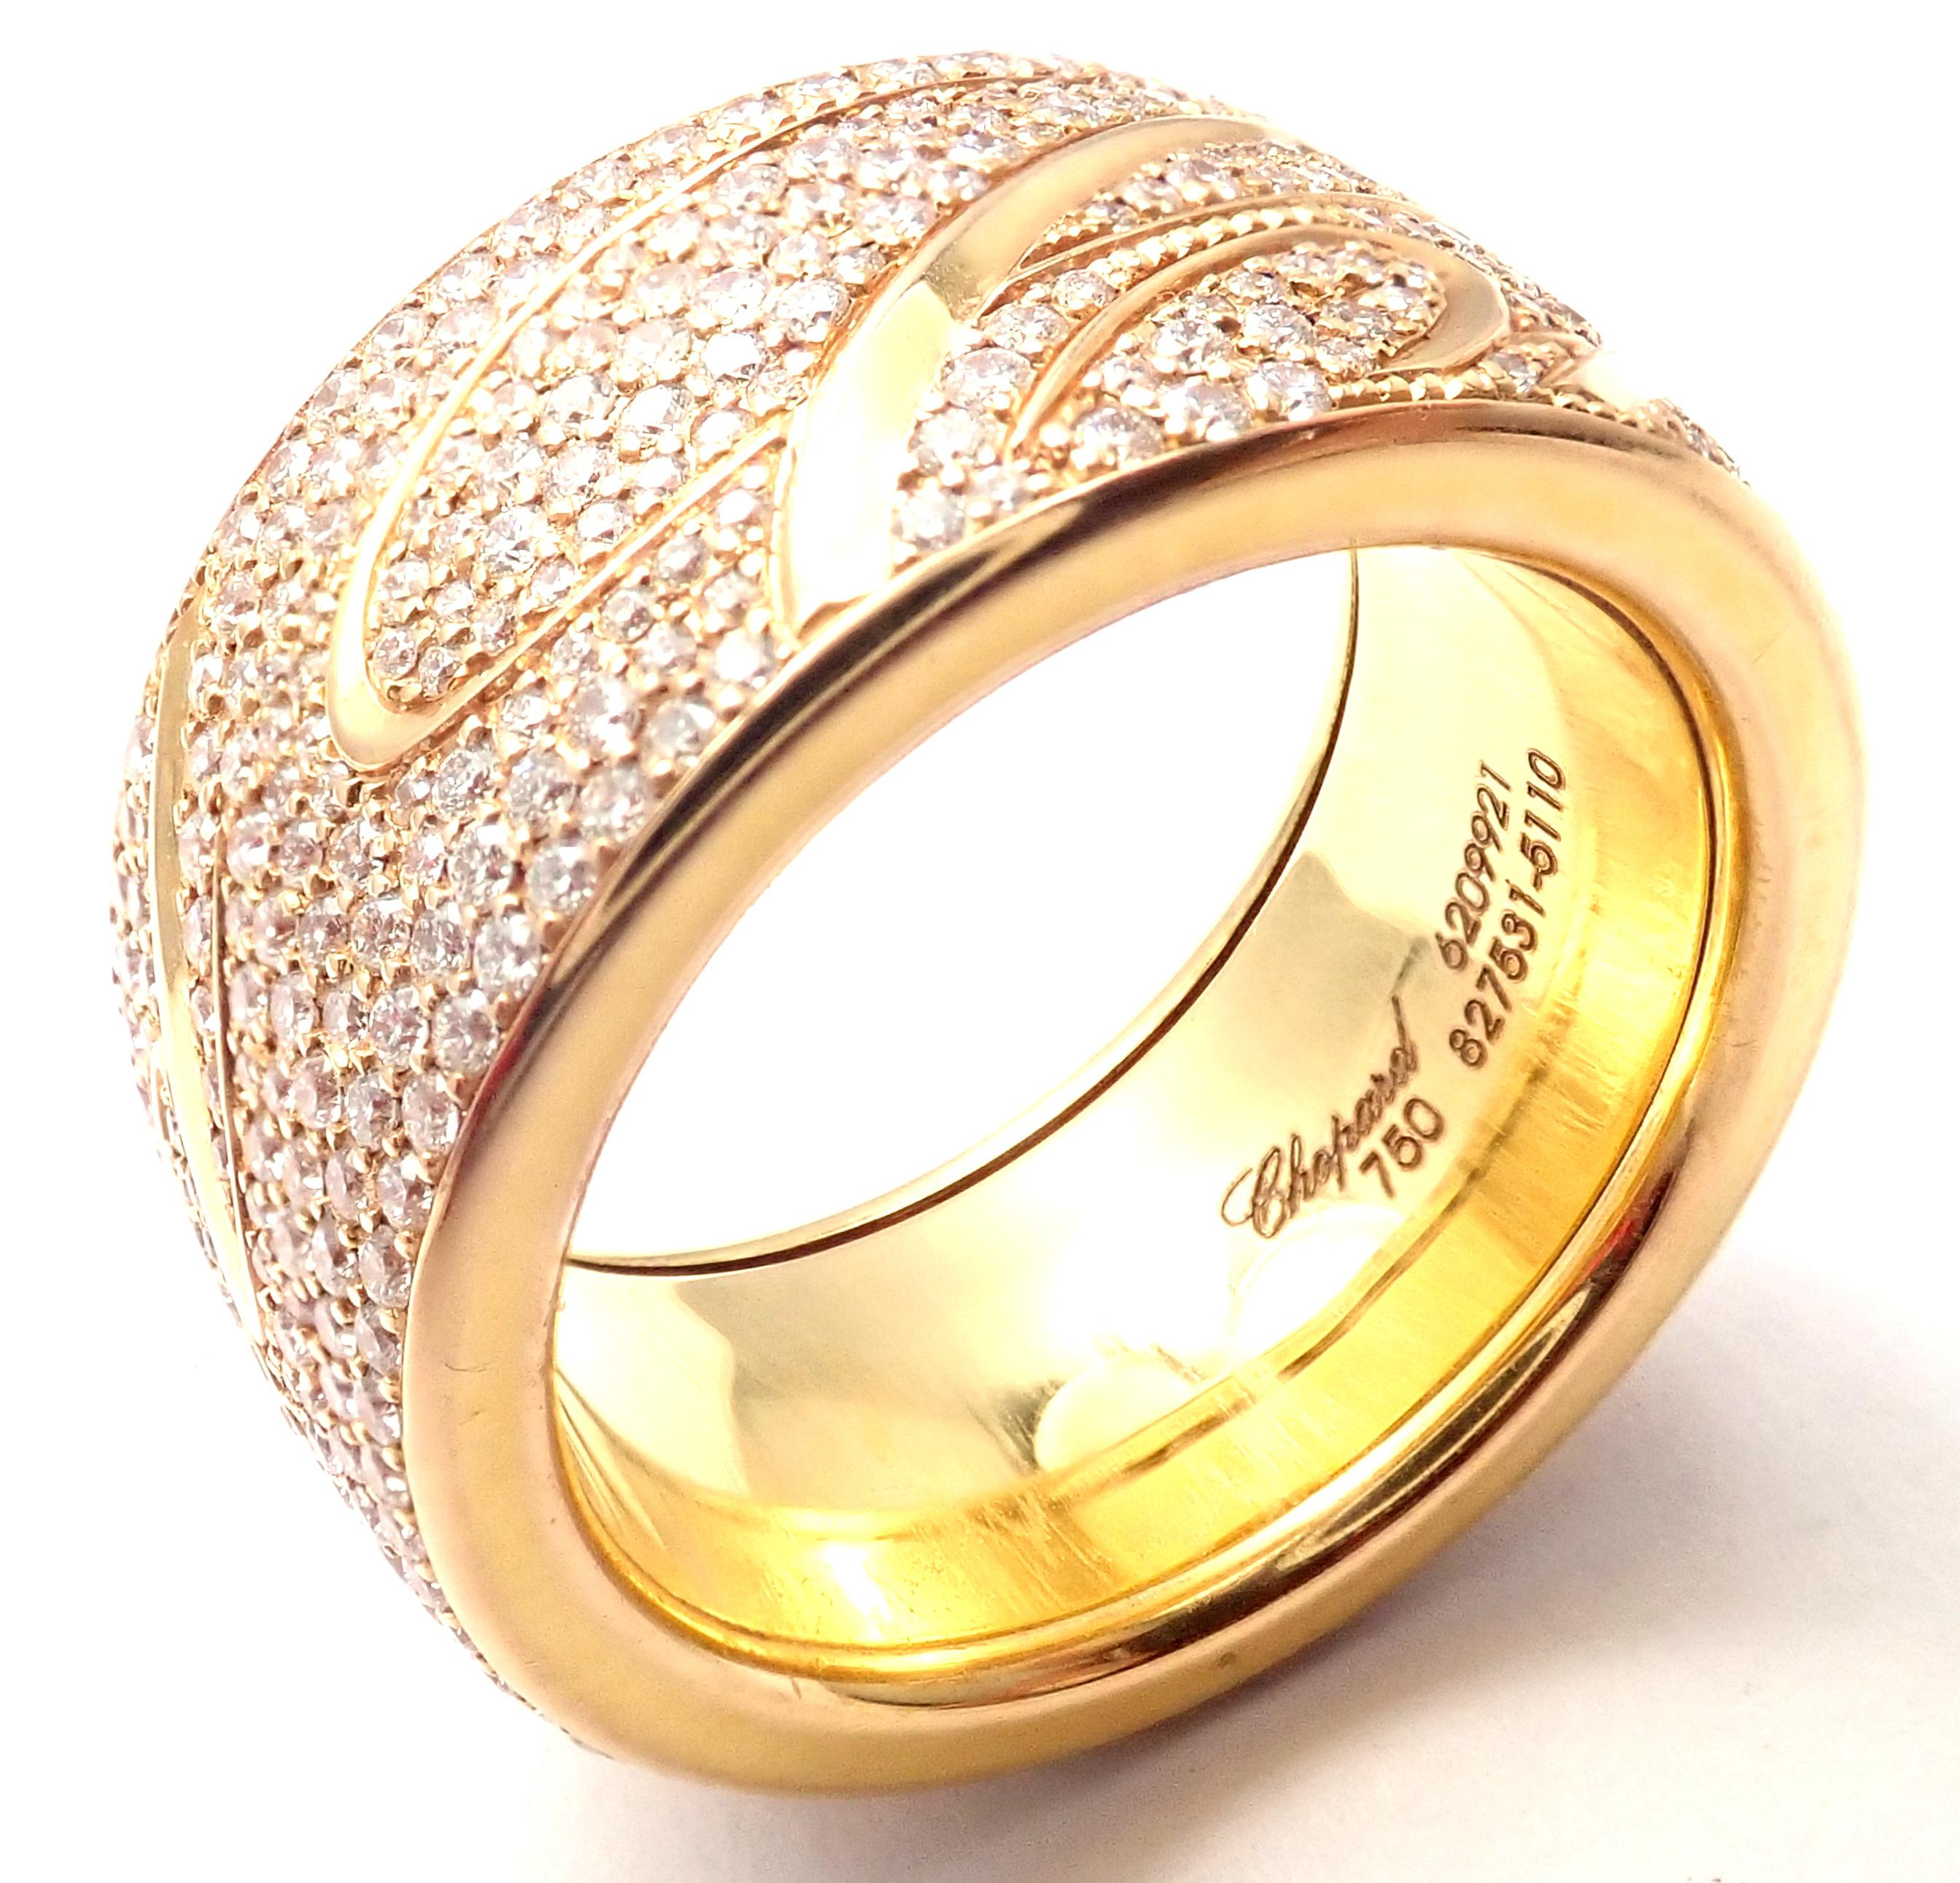 Chopard Chopardissimo 18 Karat Yellow Gold Pavé Diamond Signature Wide Band Ring For Sale 2